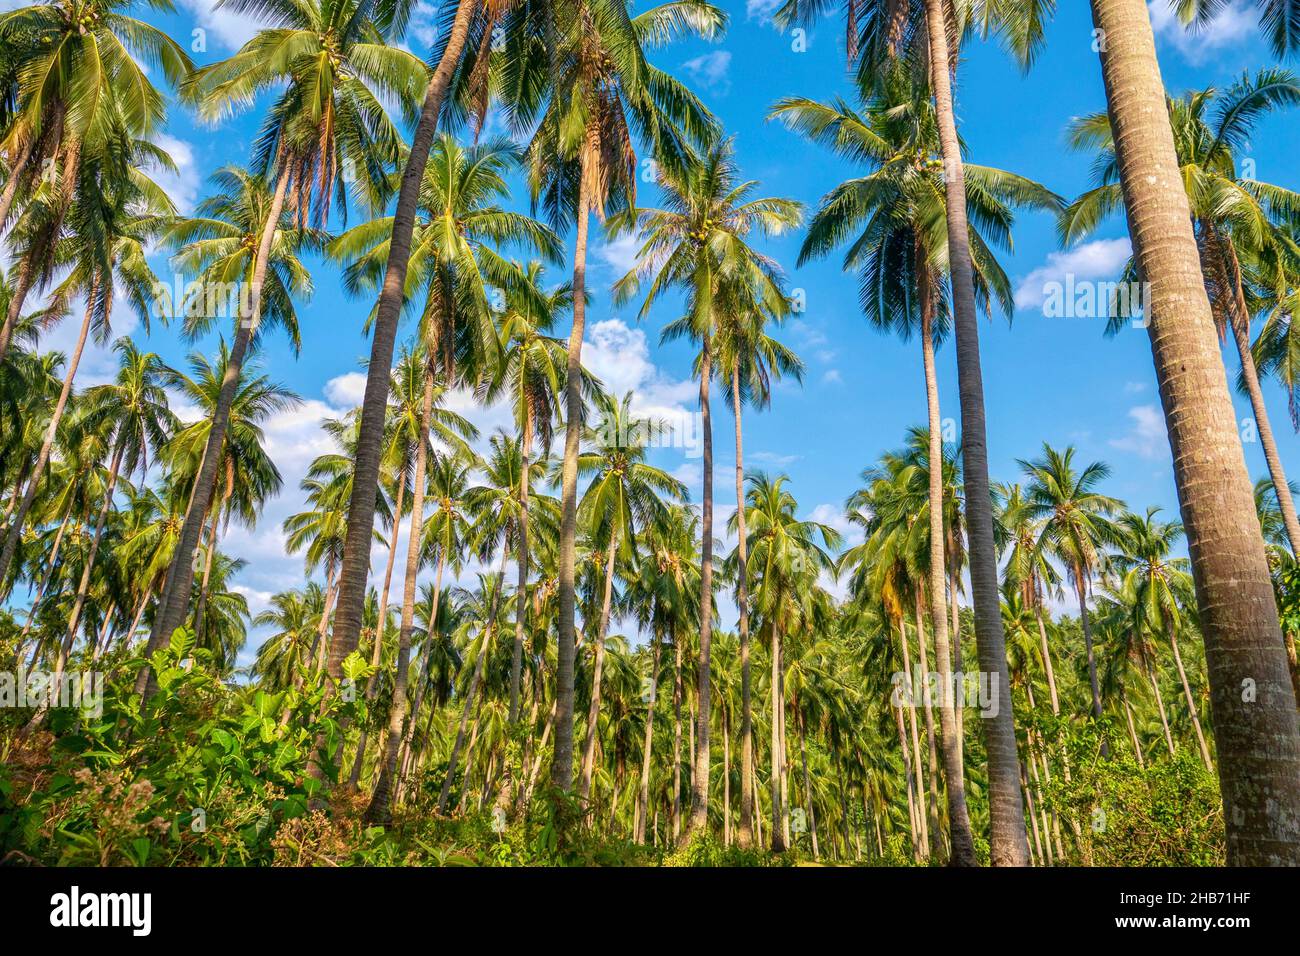 Low angle view of a large coconut plantation on Mindoro Island in the Philippines, with the long tree trunks and green fronds standing out against the Stock Photo